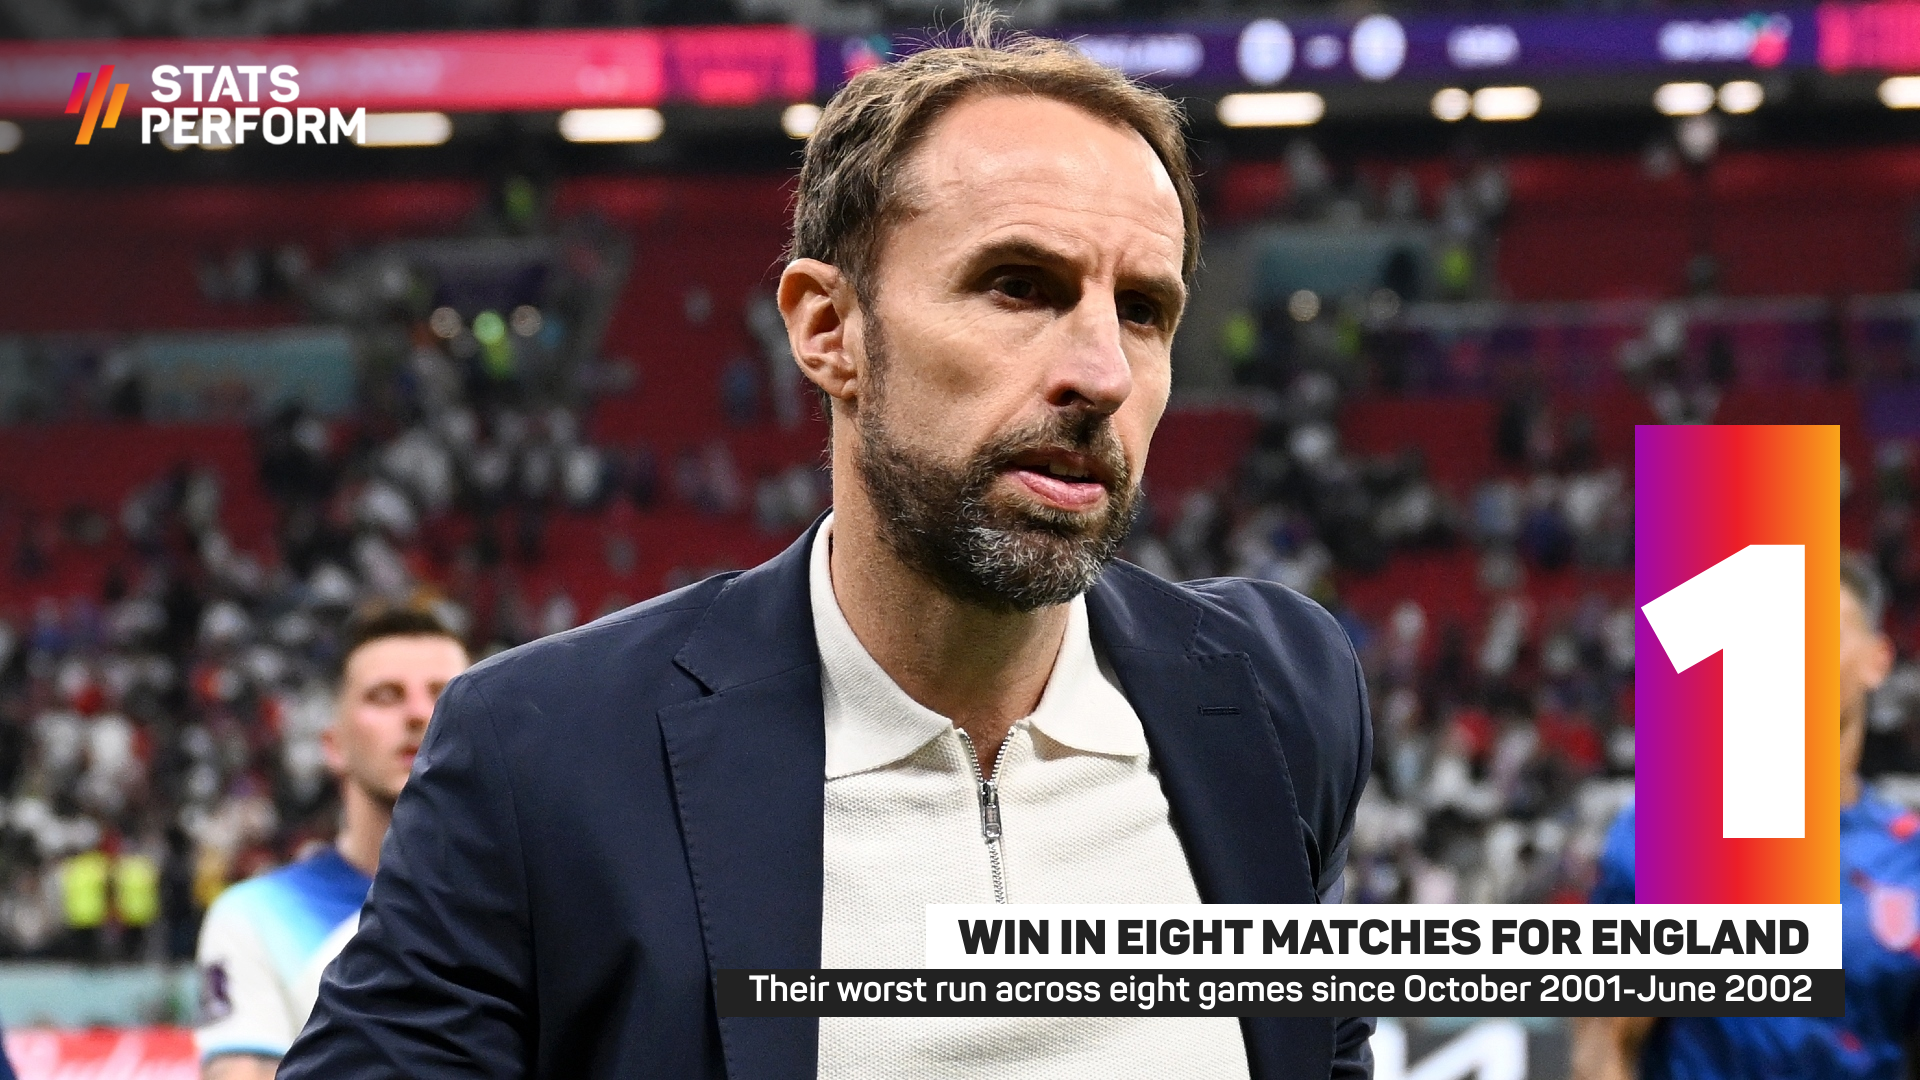 England have won one of their past eight matches